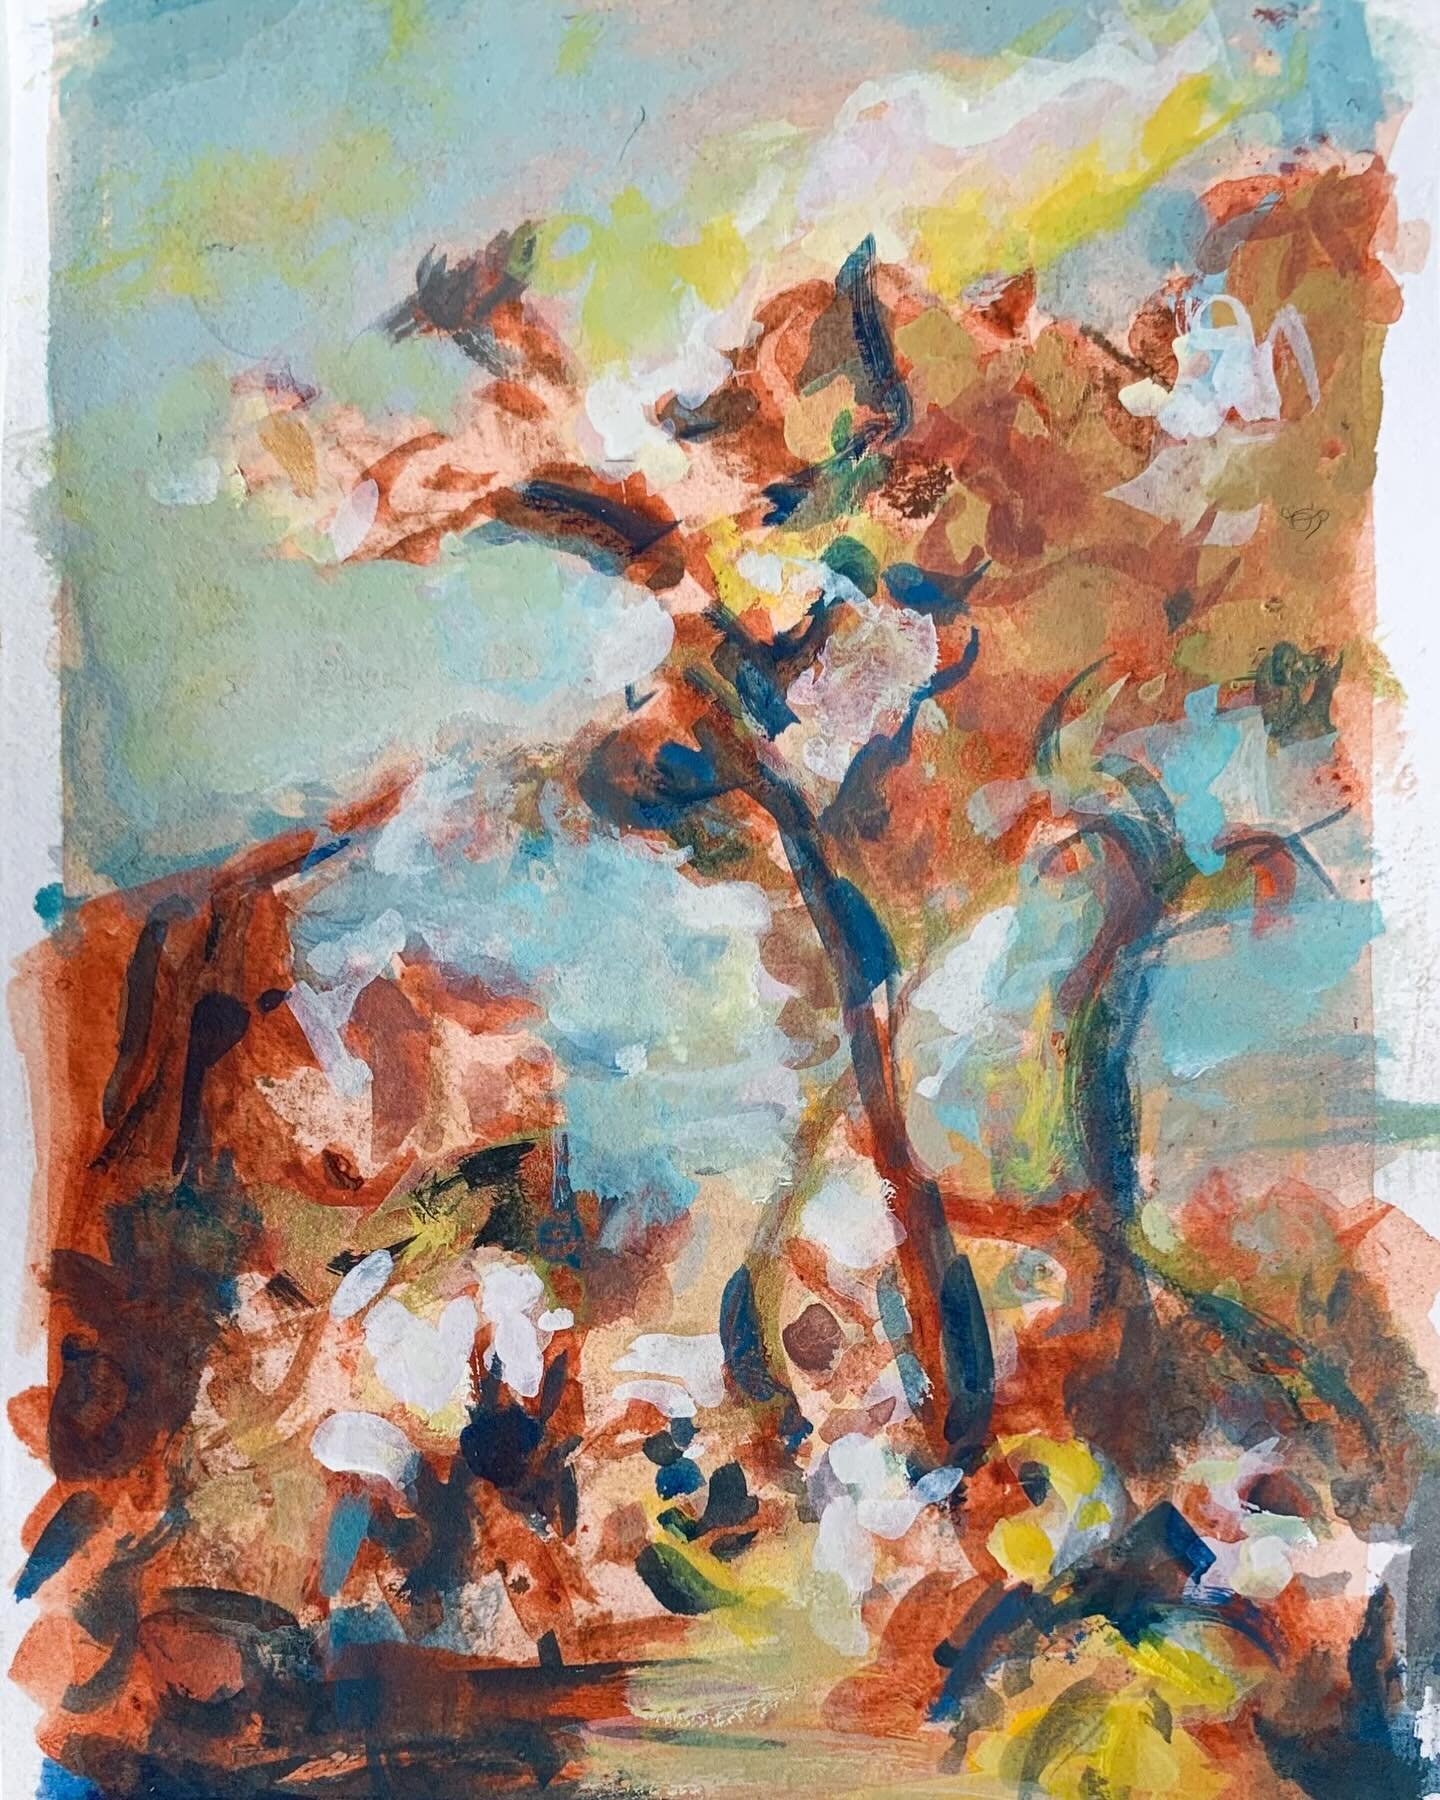 After Tiepolo &mdash; Manna in the Desert

-
Looking back at some transcriptions of Tiepolo, in particular the values and hues to create structure and movement.
⠀⠀⠀⠀⠀⠀⠀⠀⠀
Gouache on Paper
7 x 15 cm
.
. 
.
.
#Tiepolo #Woods #clouds #Contrejour #oilpai